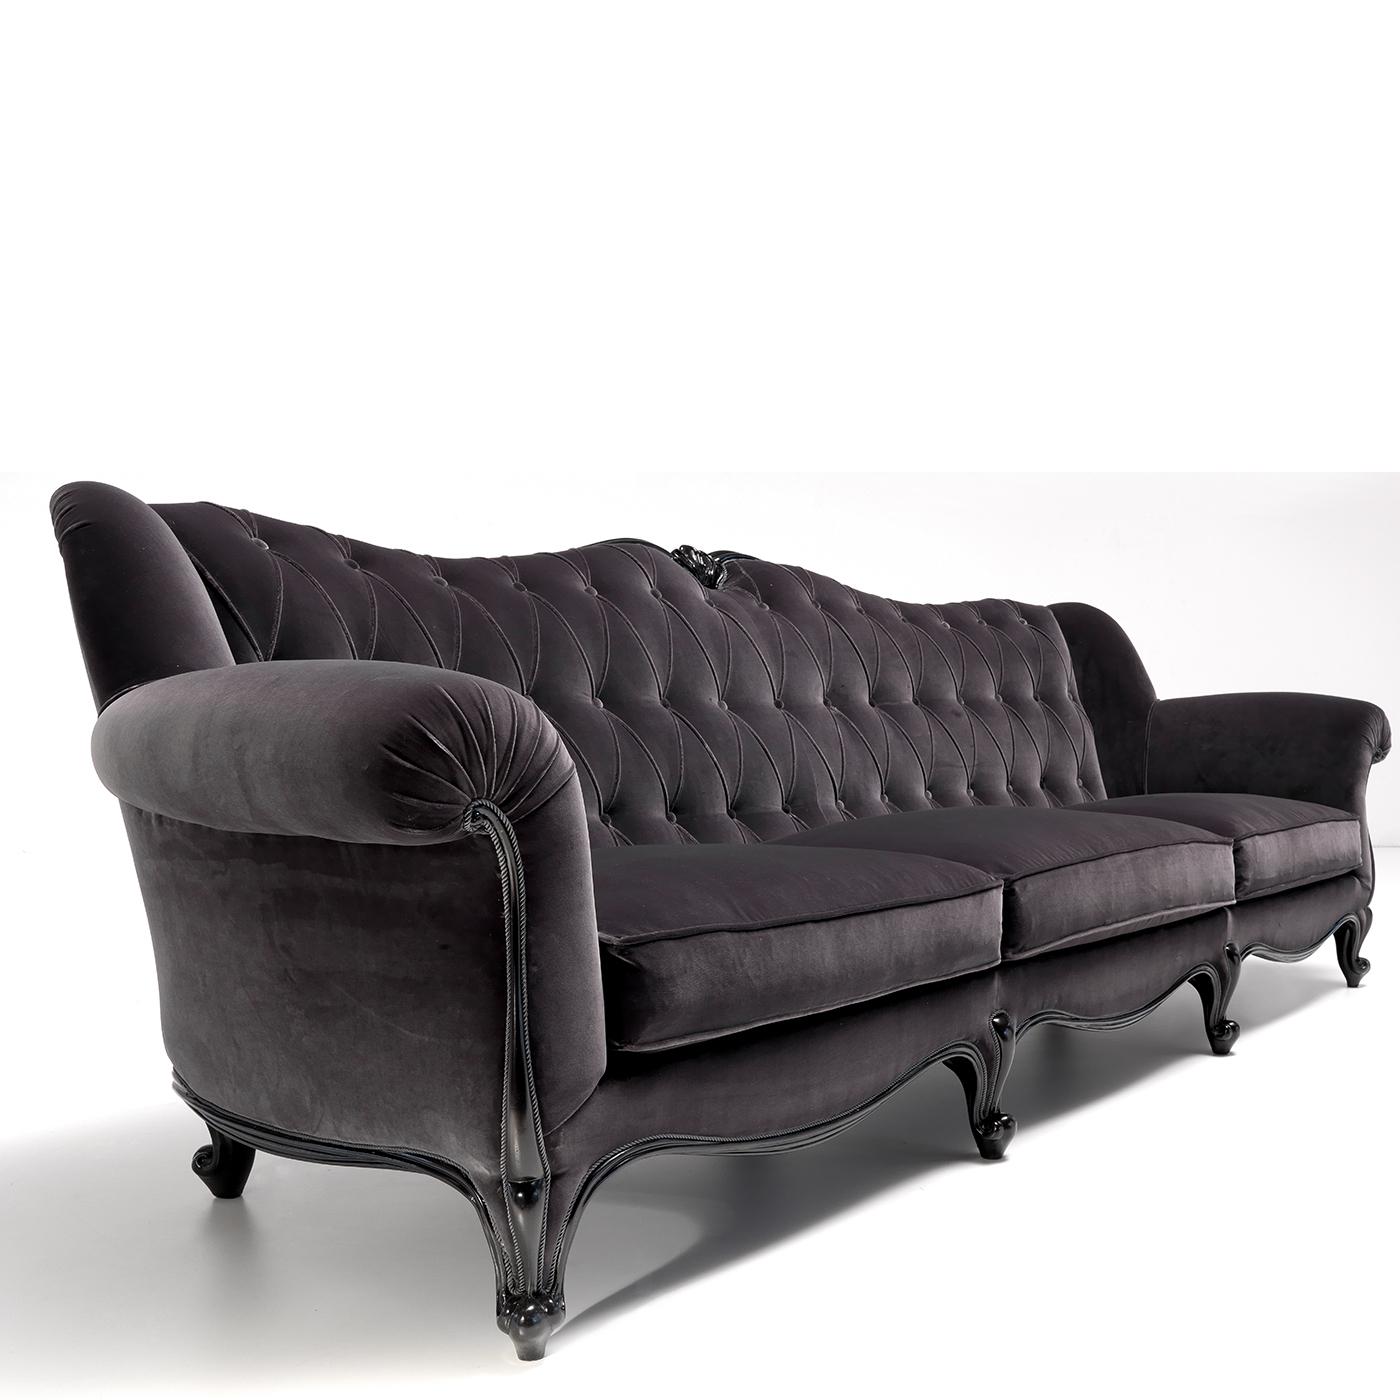 Exuding regal flair, this exquisite three-seater sofa will be a stunning piece to complement classic decors. An ultra-soft velvet upholstery in an intense dark hue covers the generously padded frame fashioned of solid durmast. The outward-curving